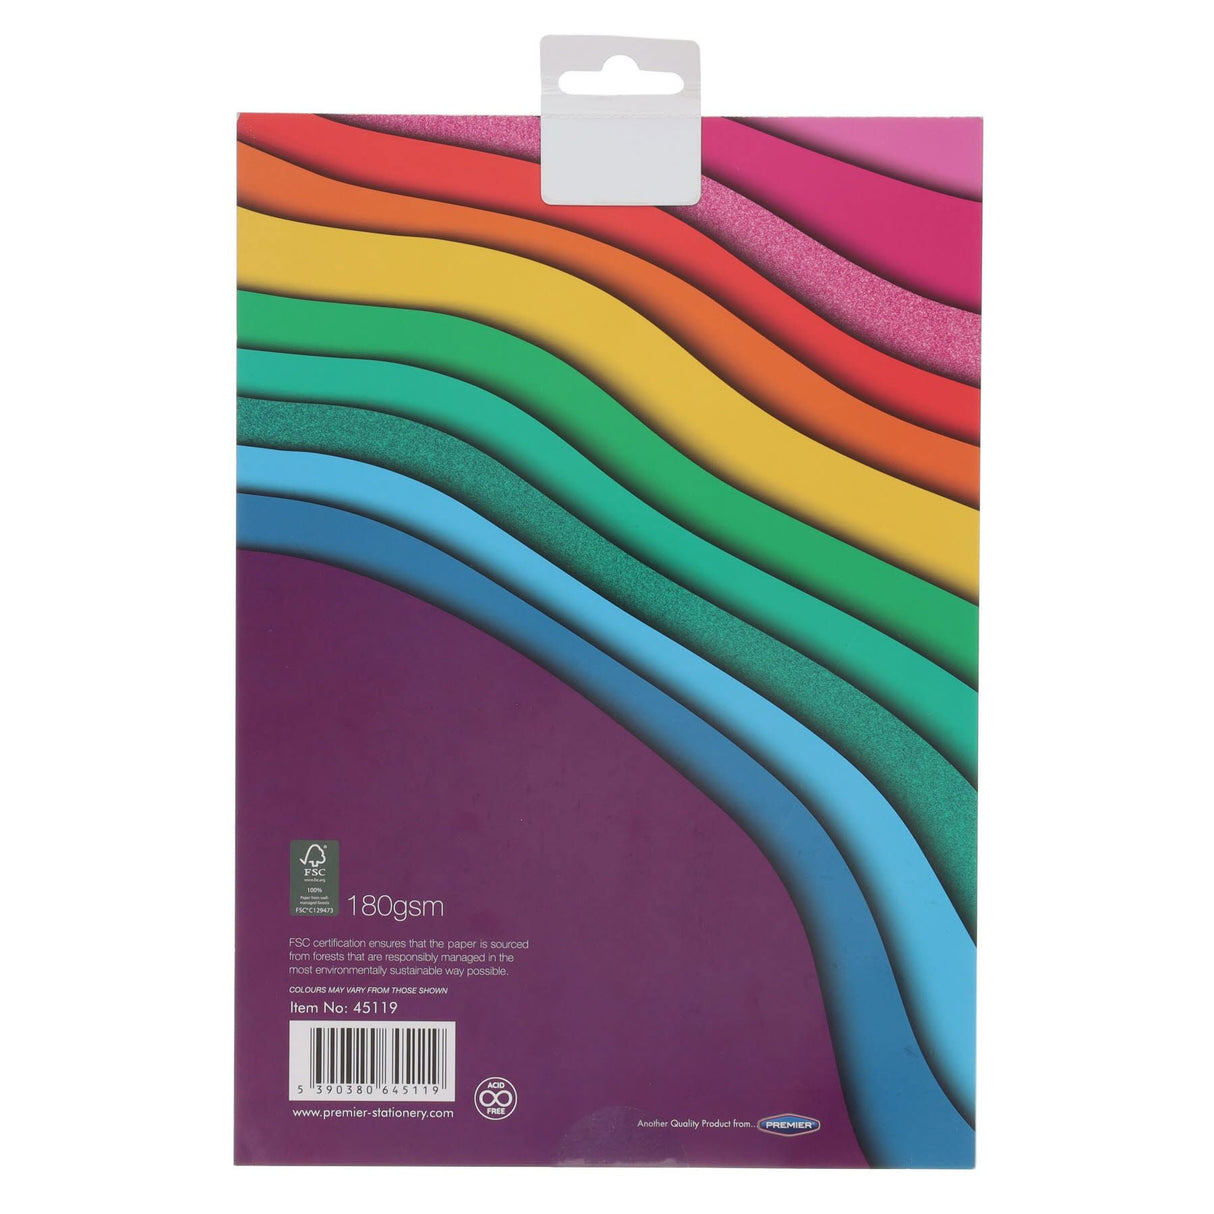 Premier Activity A4 Paper Pad - 24 Sheets - 180gsm - Shades of Rainbow-Craft Paper & Card-Premier|StationeryShop.co.uk